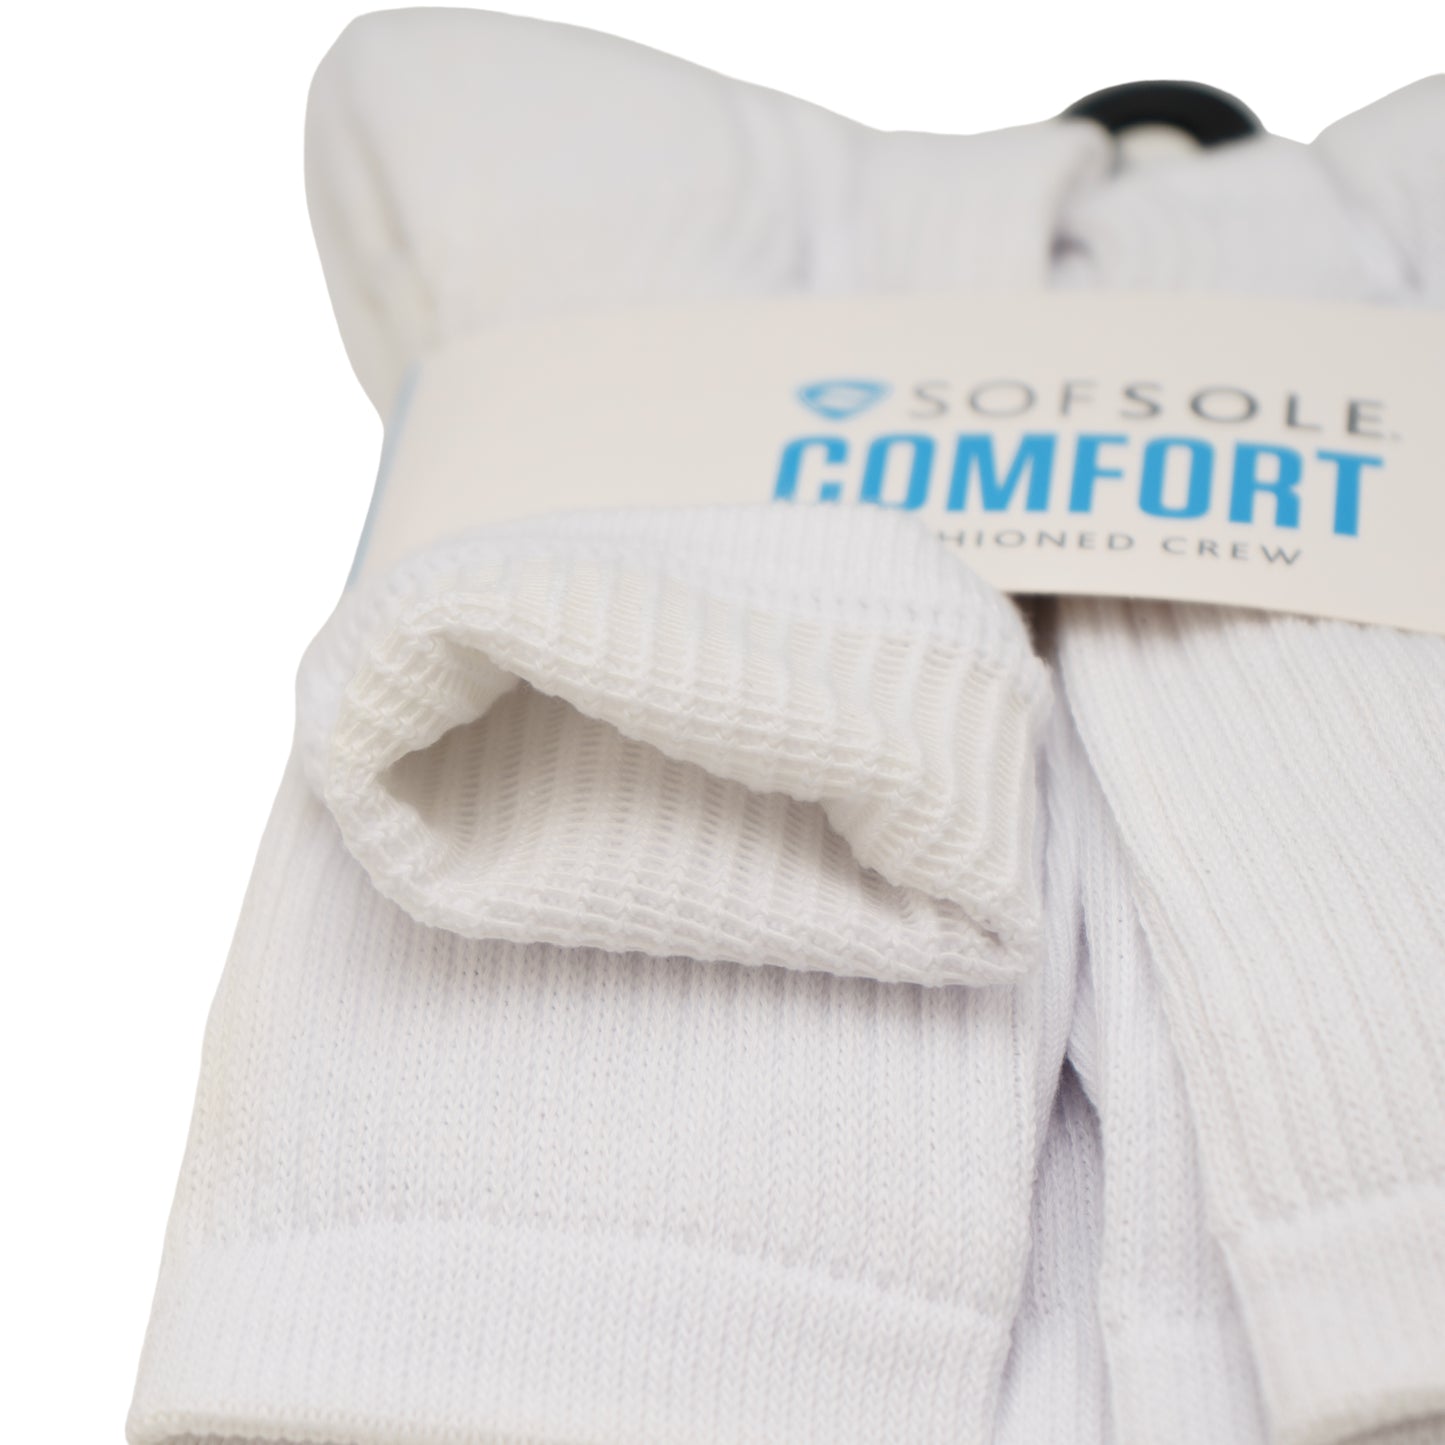 Sof Sole Comfort Casual Poly Blend Cushion Crew - White